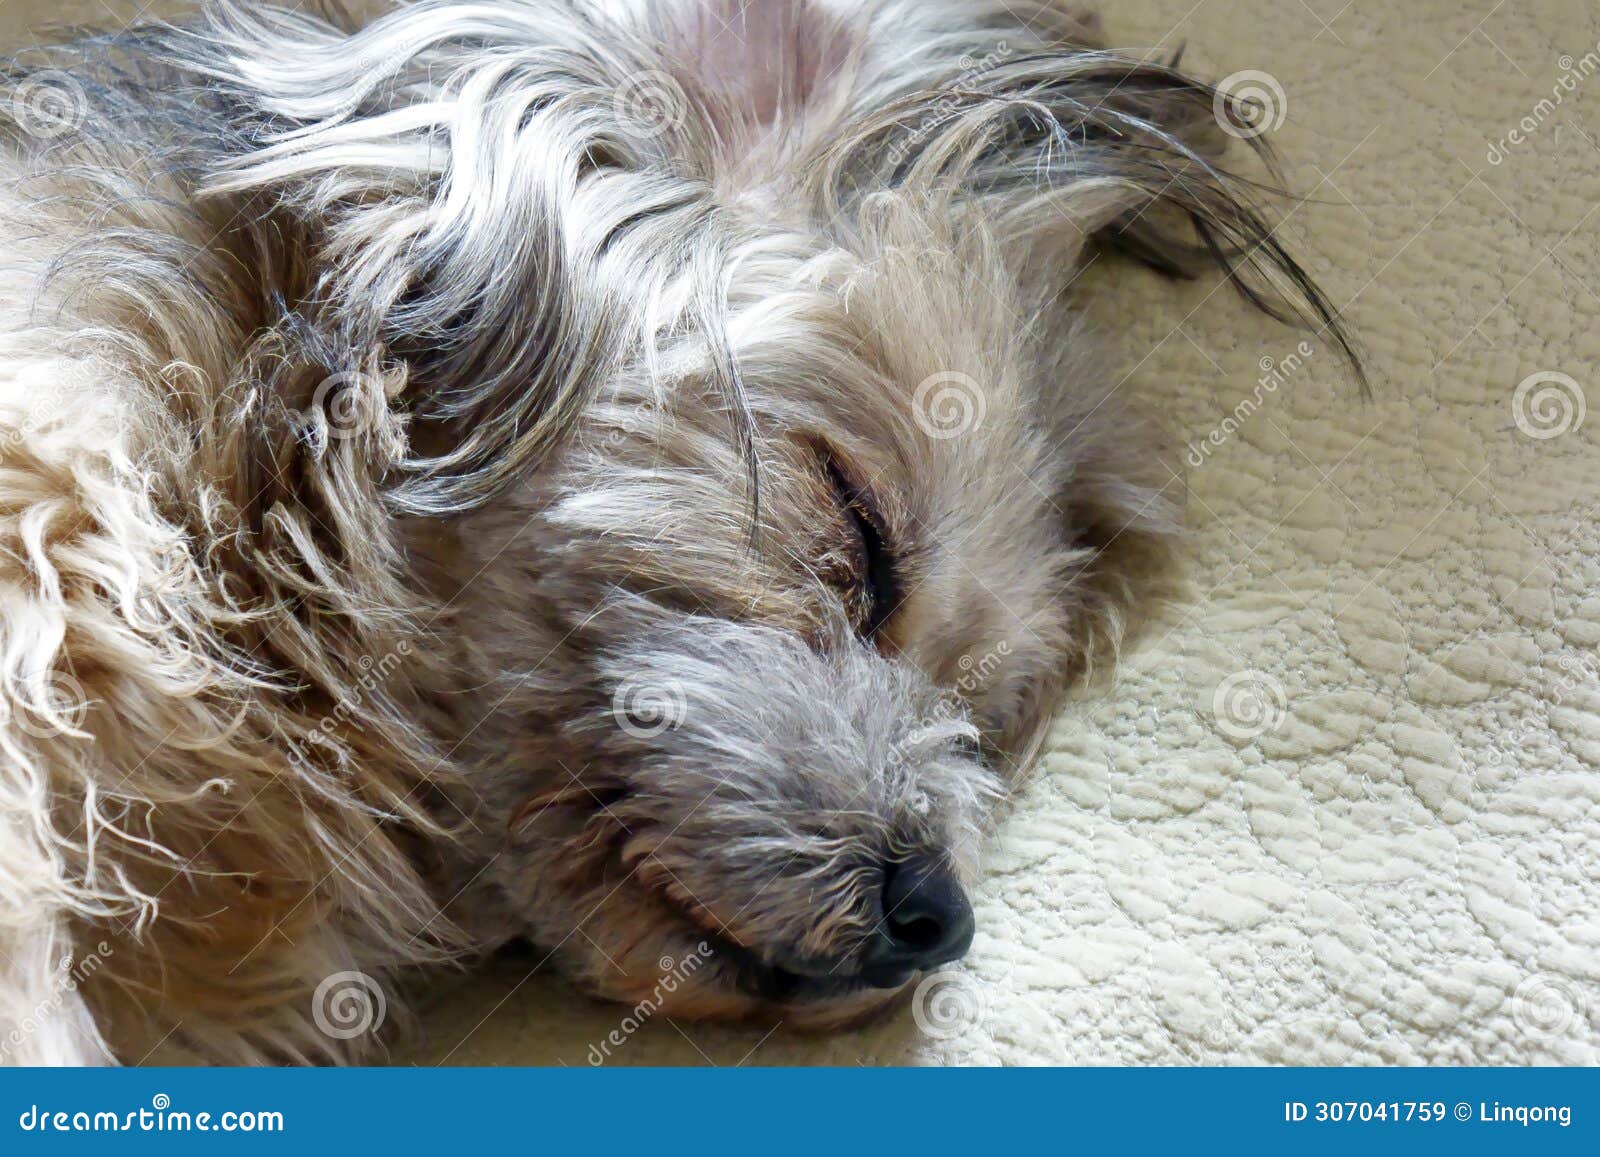 close-up photo of a dog sleeping soundly.